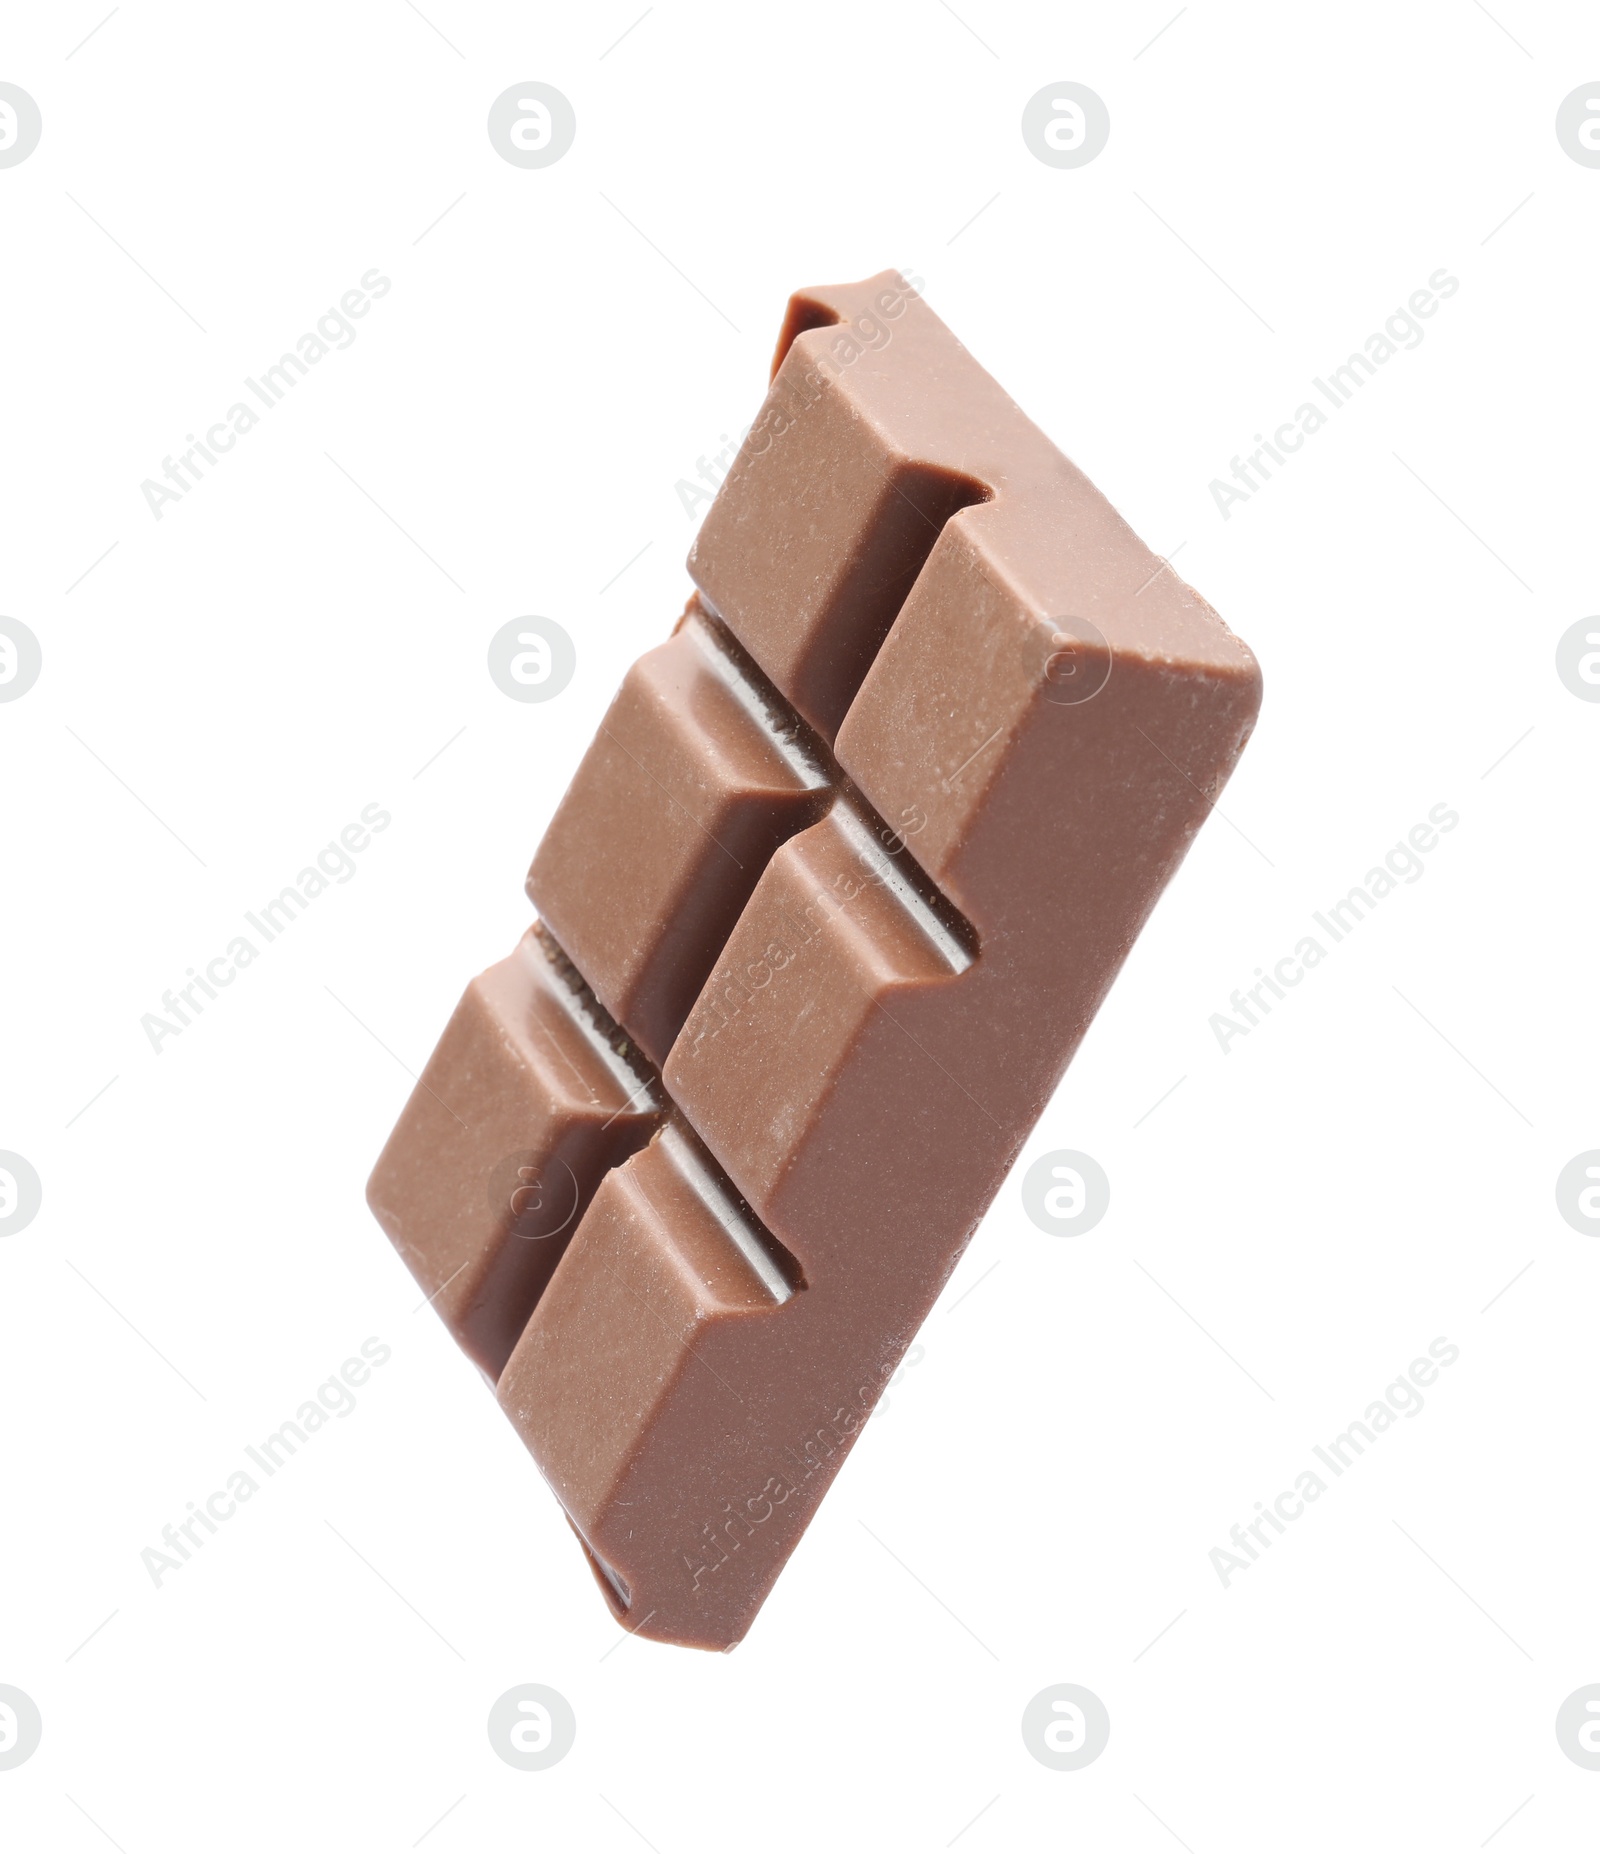 Photo of Piece of delicious milk chocolate isolated on white